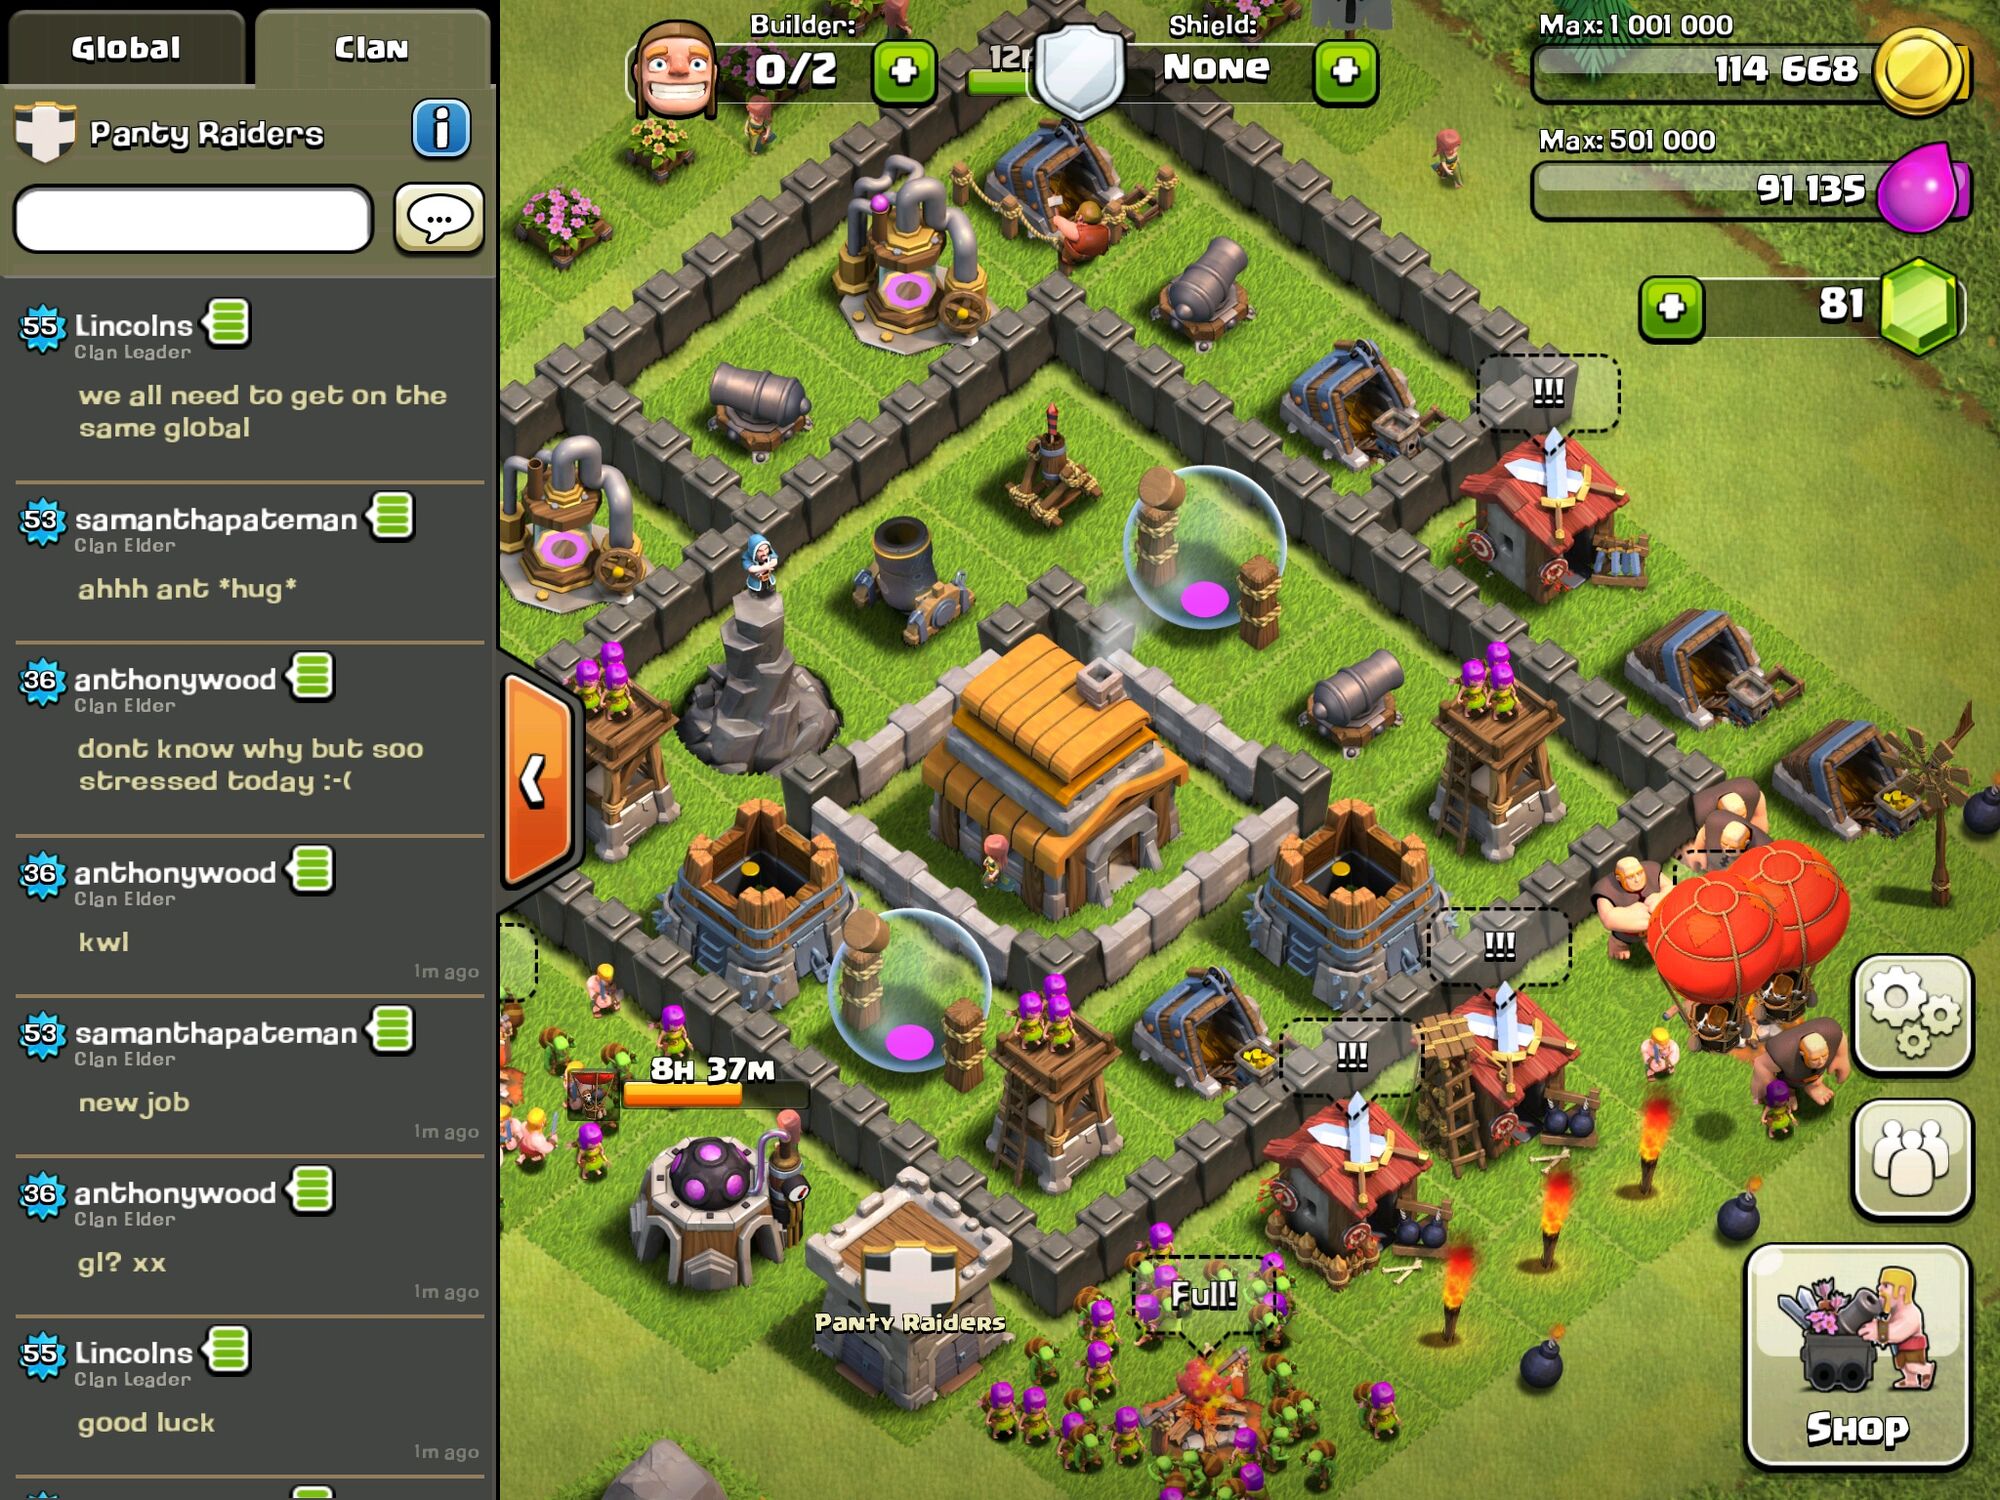 Supercell's clash of clans. Clash of Clans Интерфейс. Clash of Clans UI. Ратуша 4 уровня. Clash of Clans ПЕККА.